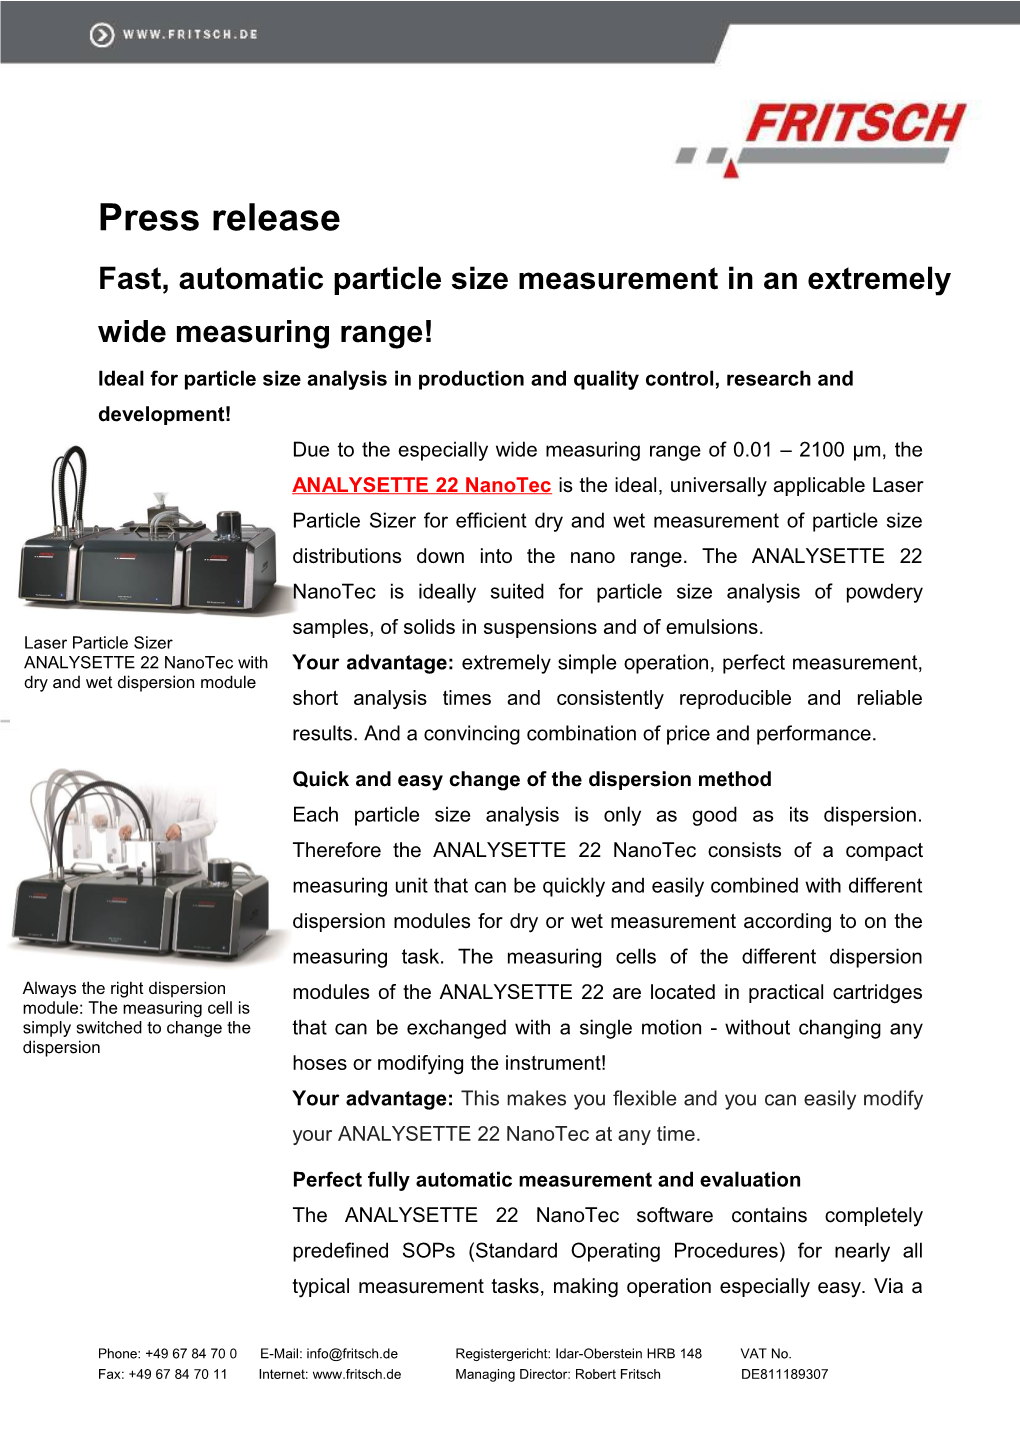 Fast, Automatic Particle Size Measurement in an Extremely Wide Measuring Range!